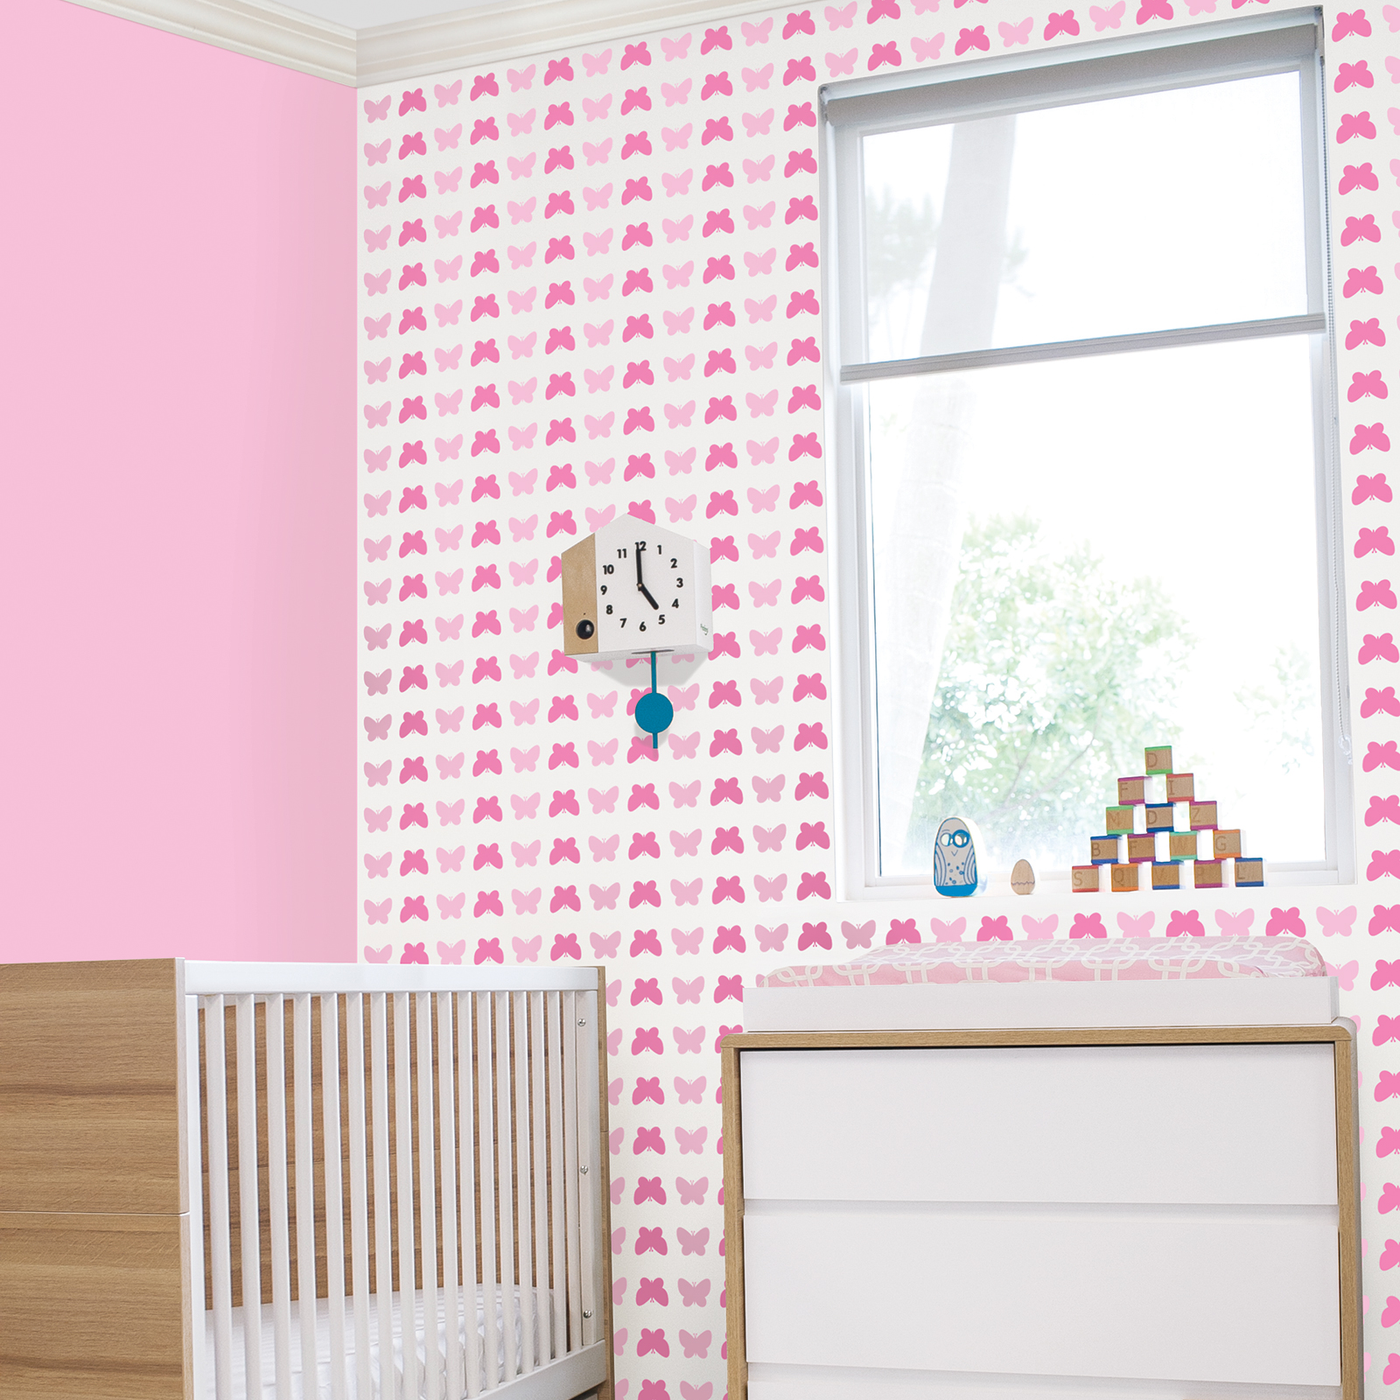 Butterfly peel and stick wallpaper in pink in a kids bedroom.